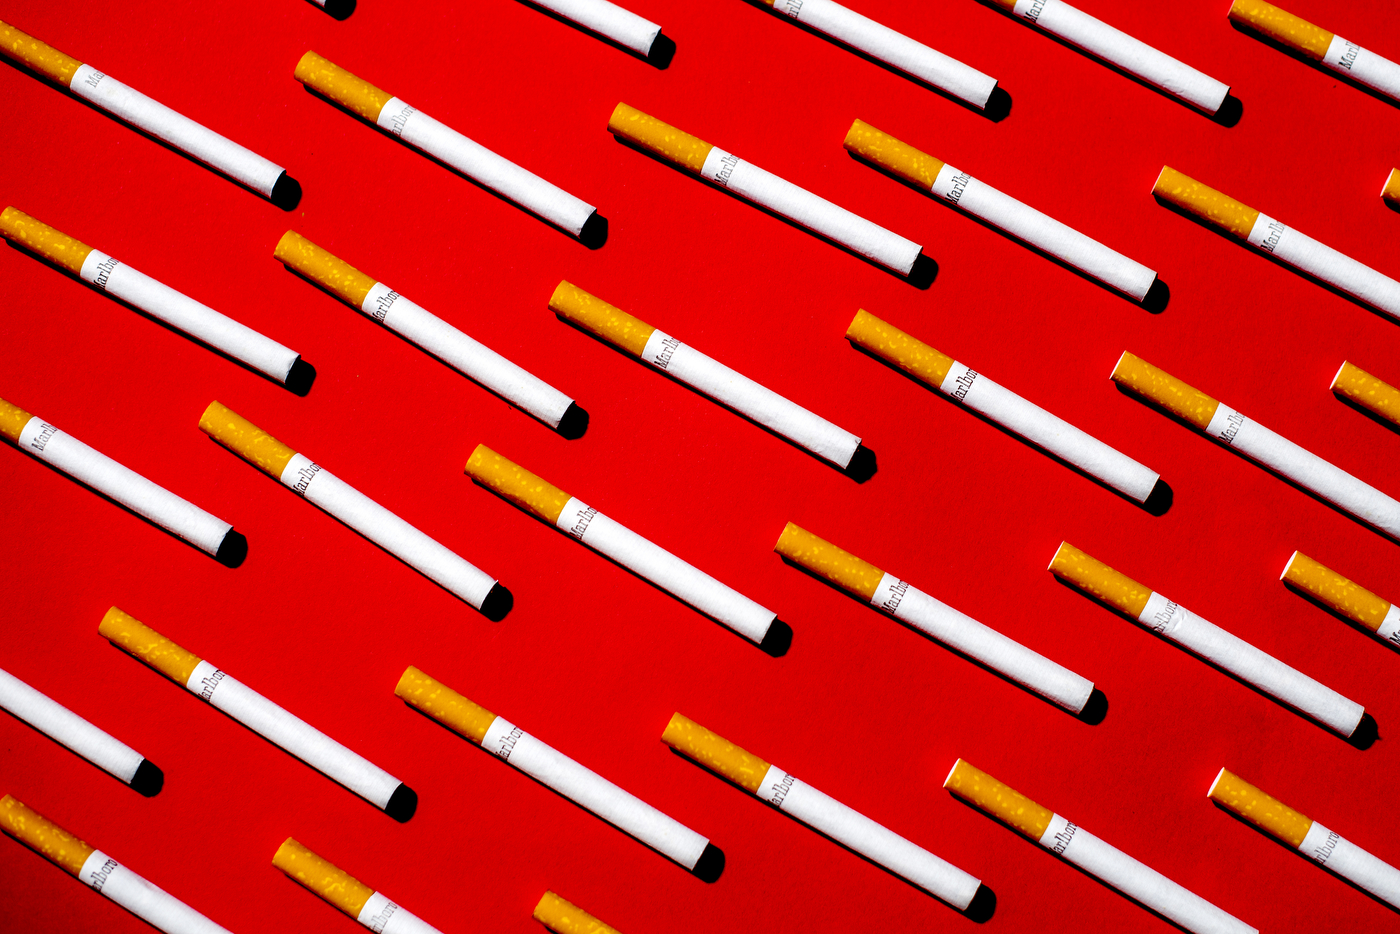 cigarettes on a red background